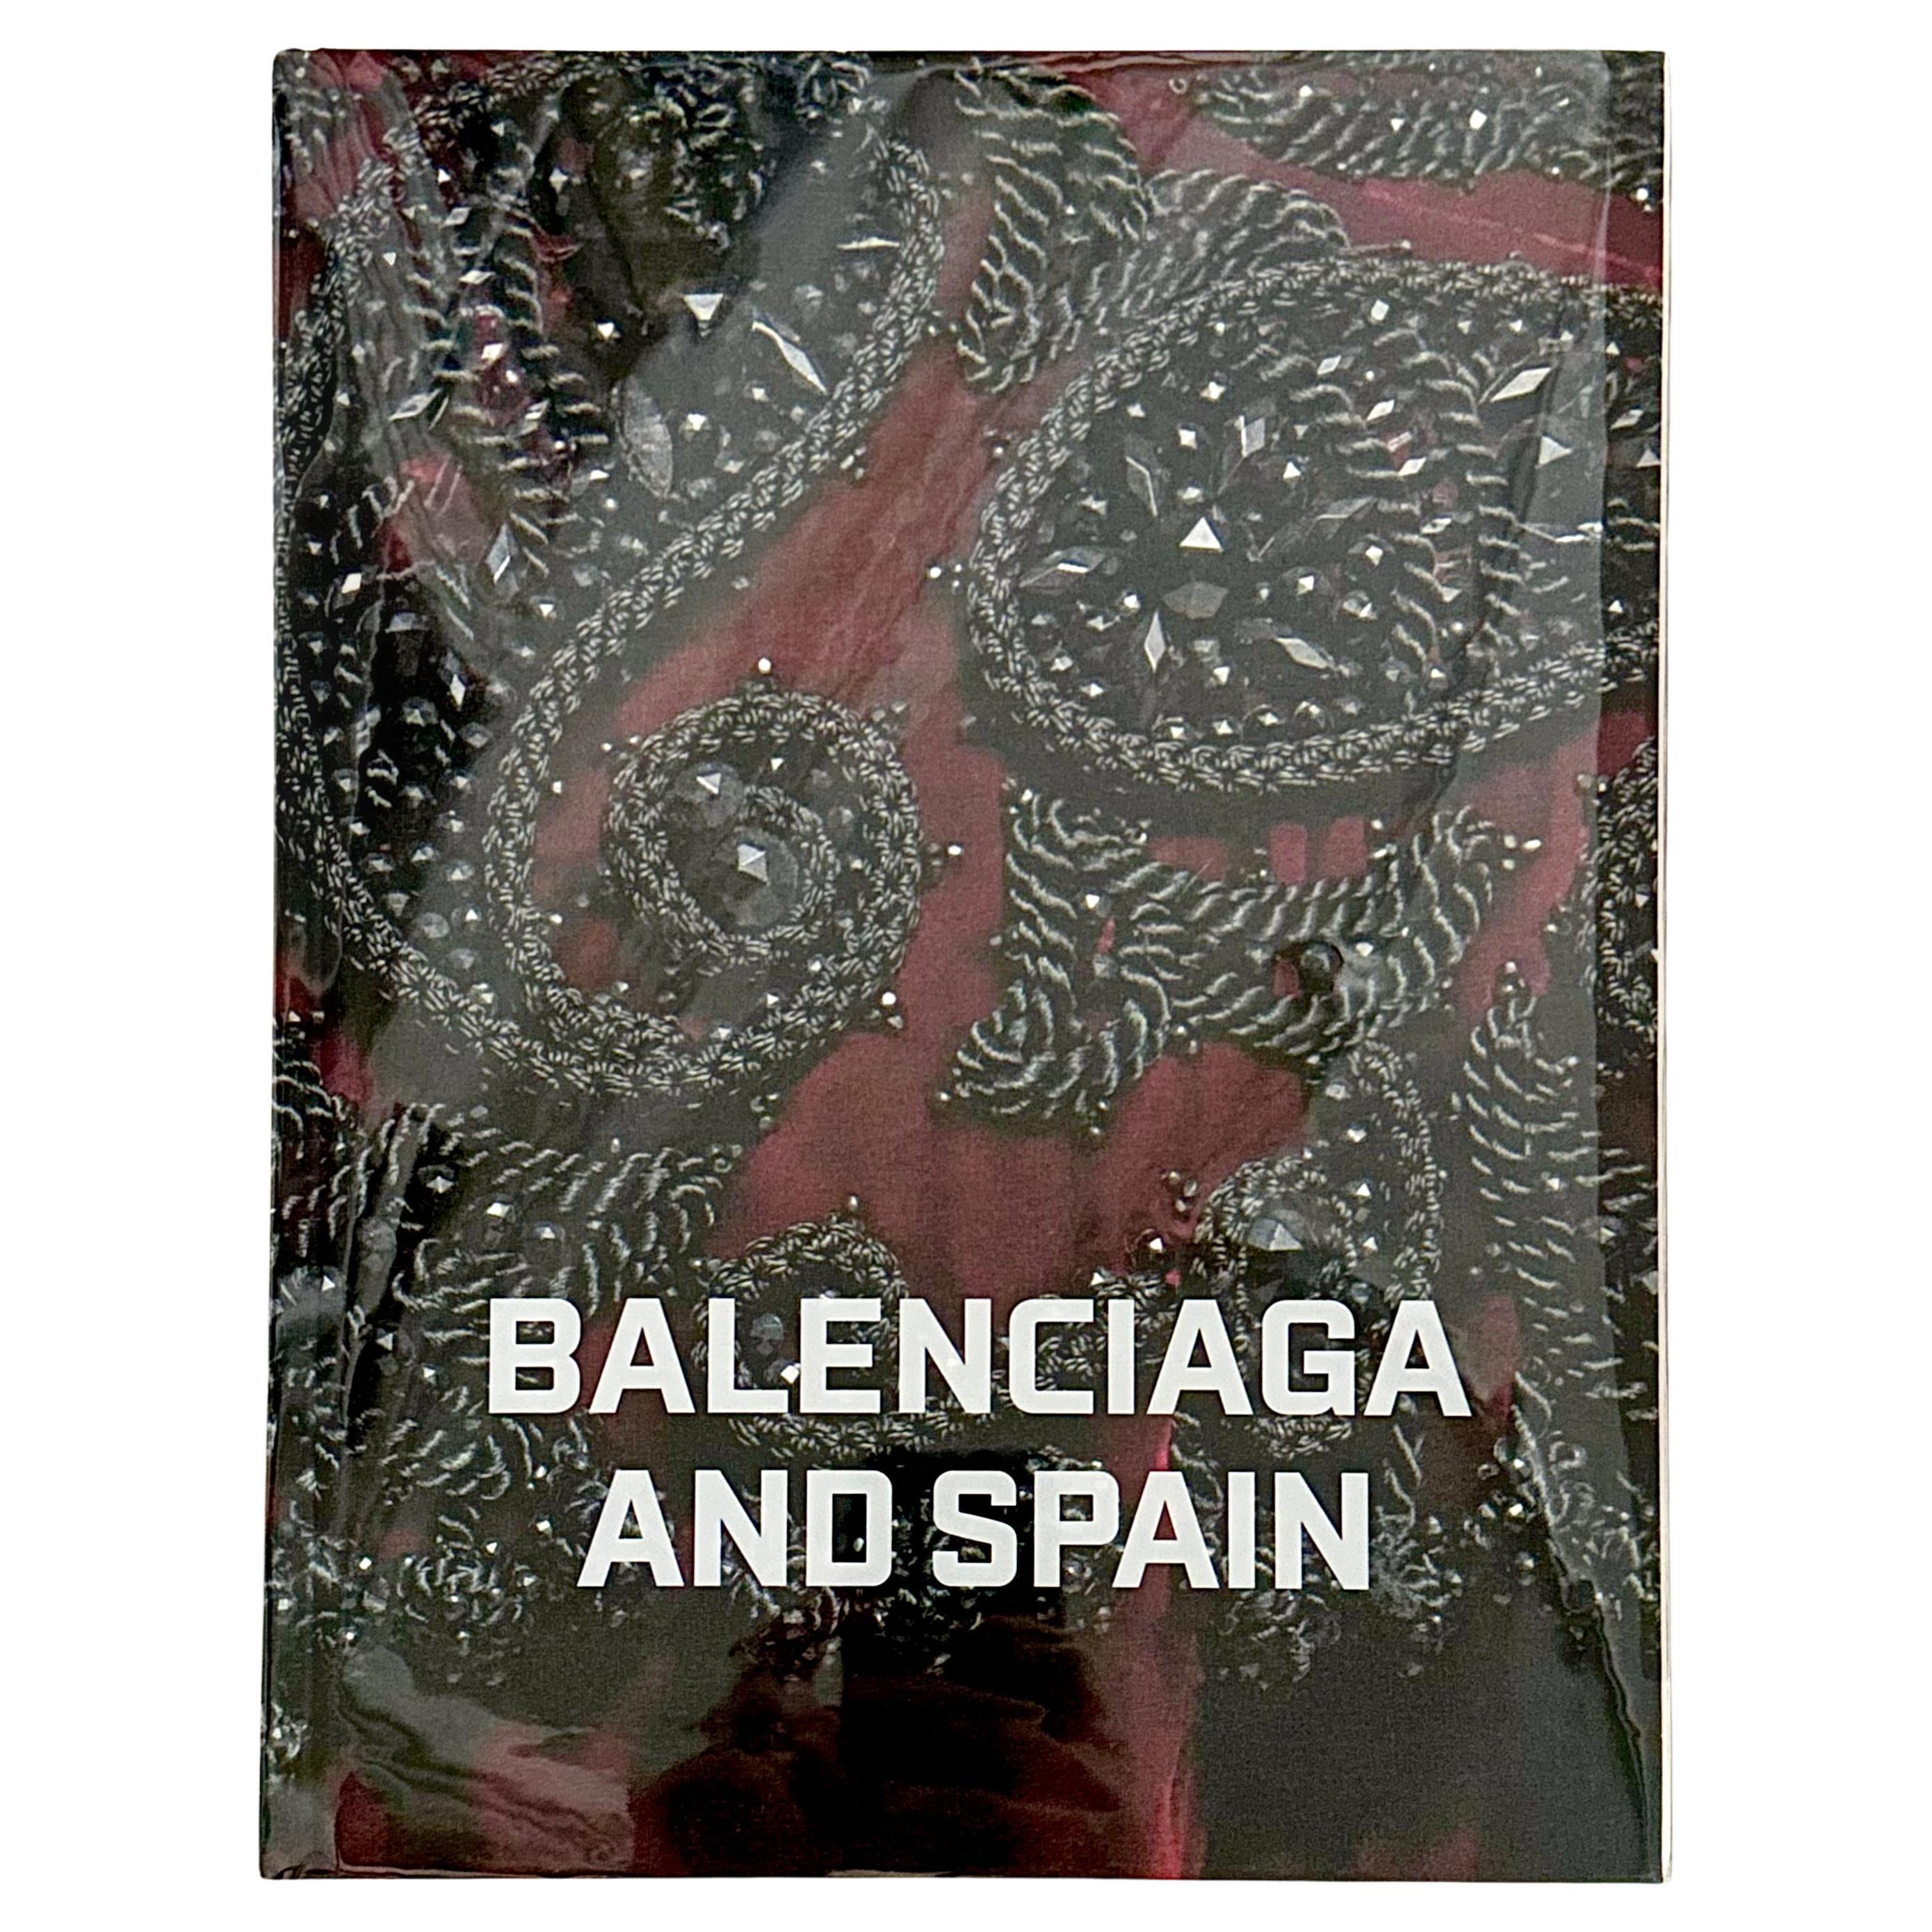 Balenciaga and Spain - Hamish Bowles - 1st Edition, New York, 2011 For Sale